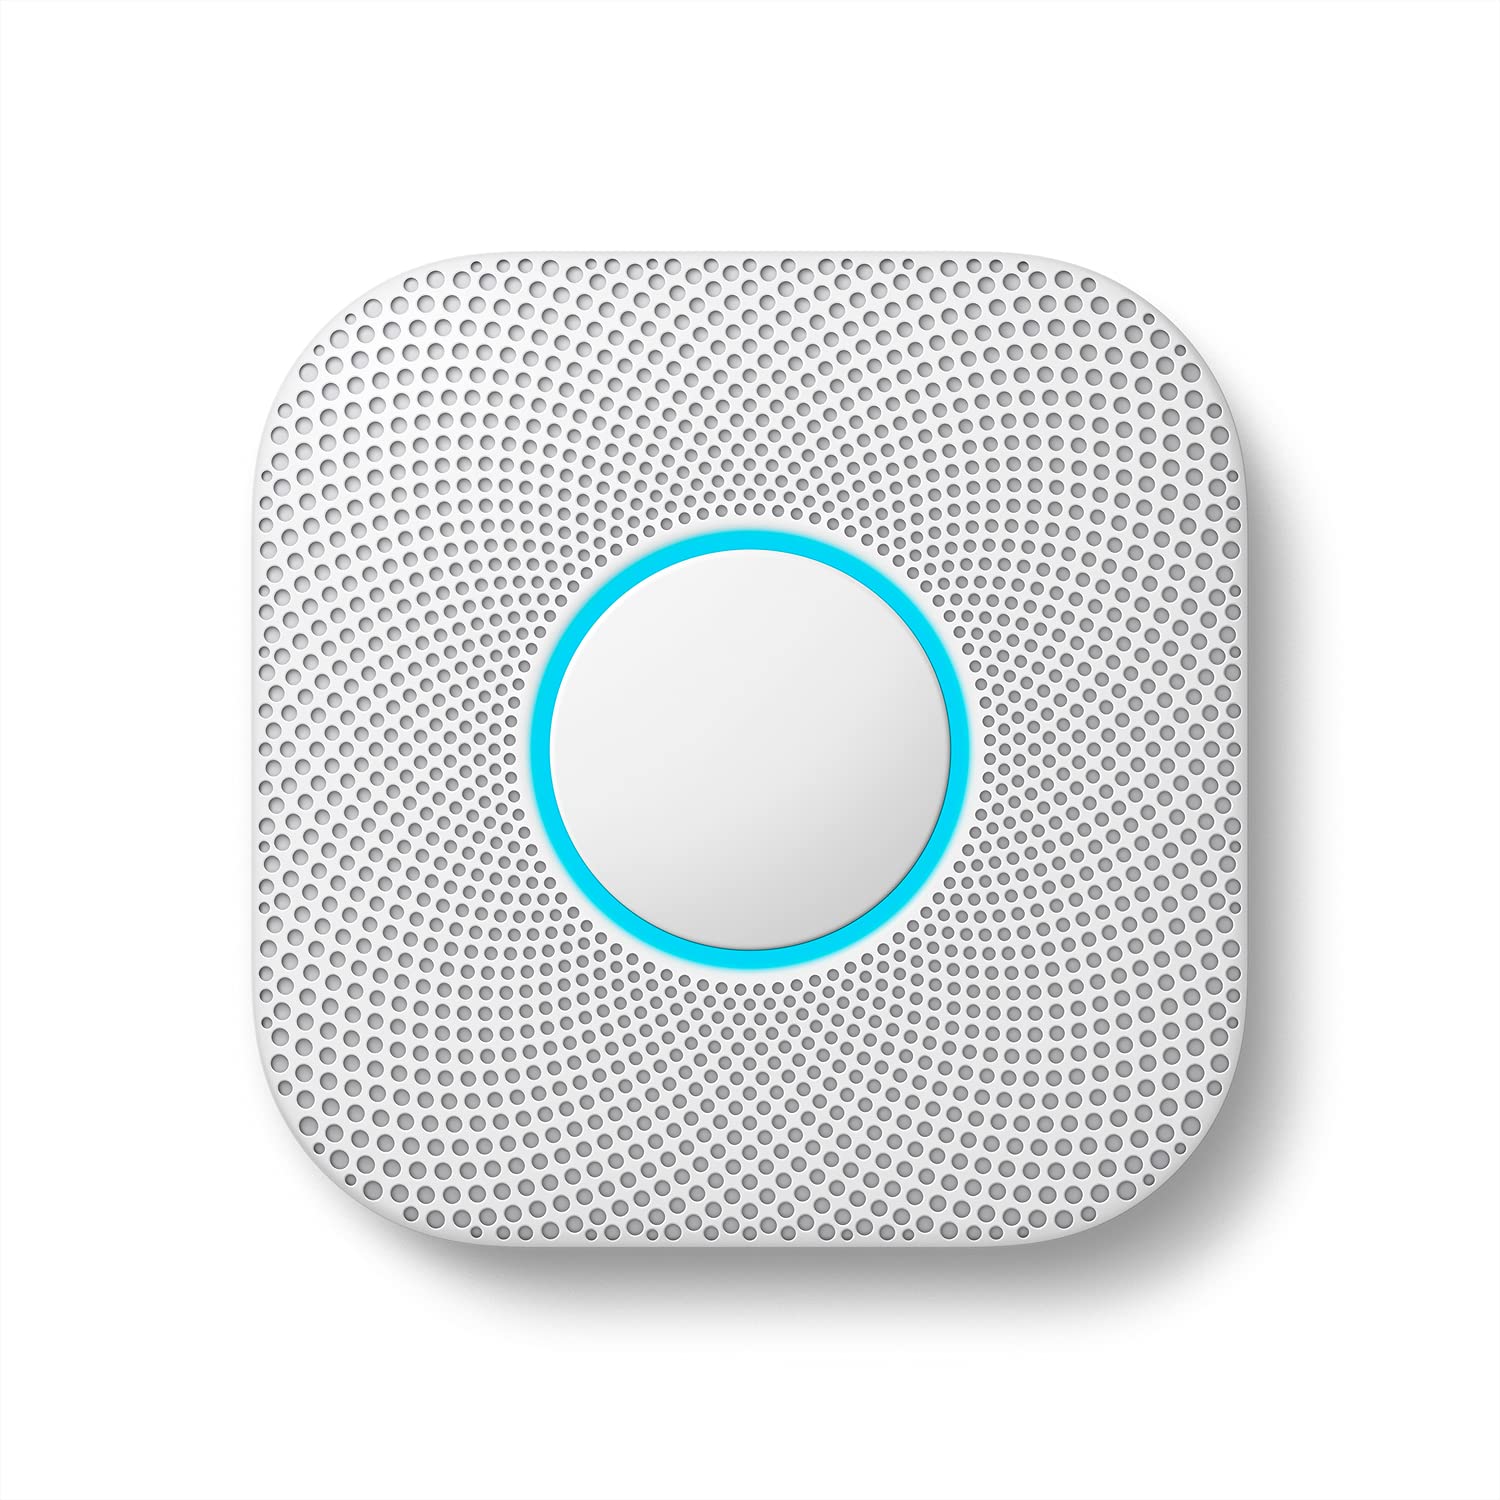 Google Nest Protect - Combo Smoke Detector and Carbon Monoxide Detector - Wired, White $83.27 at Amazon.com